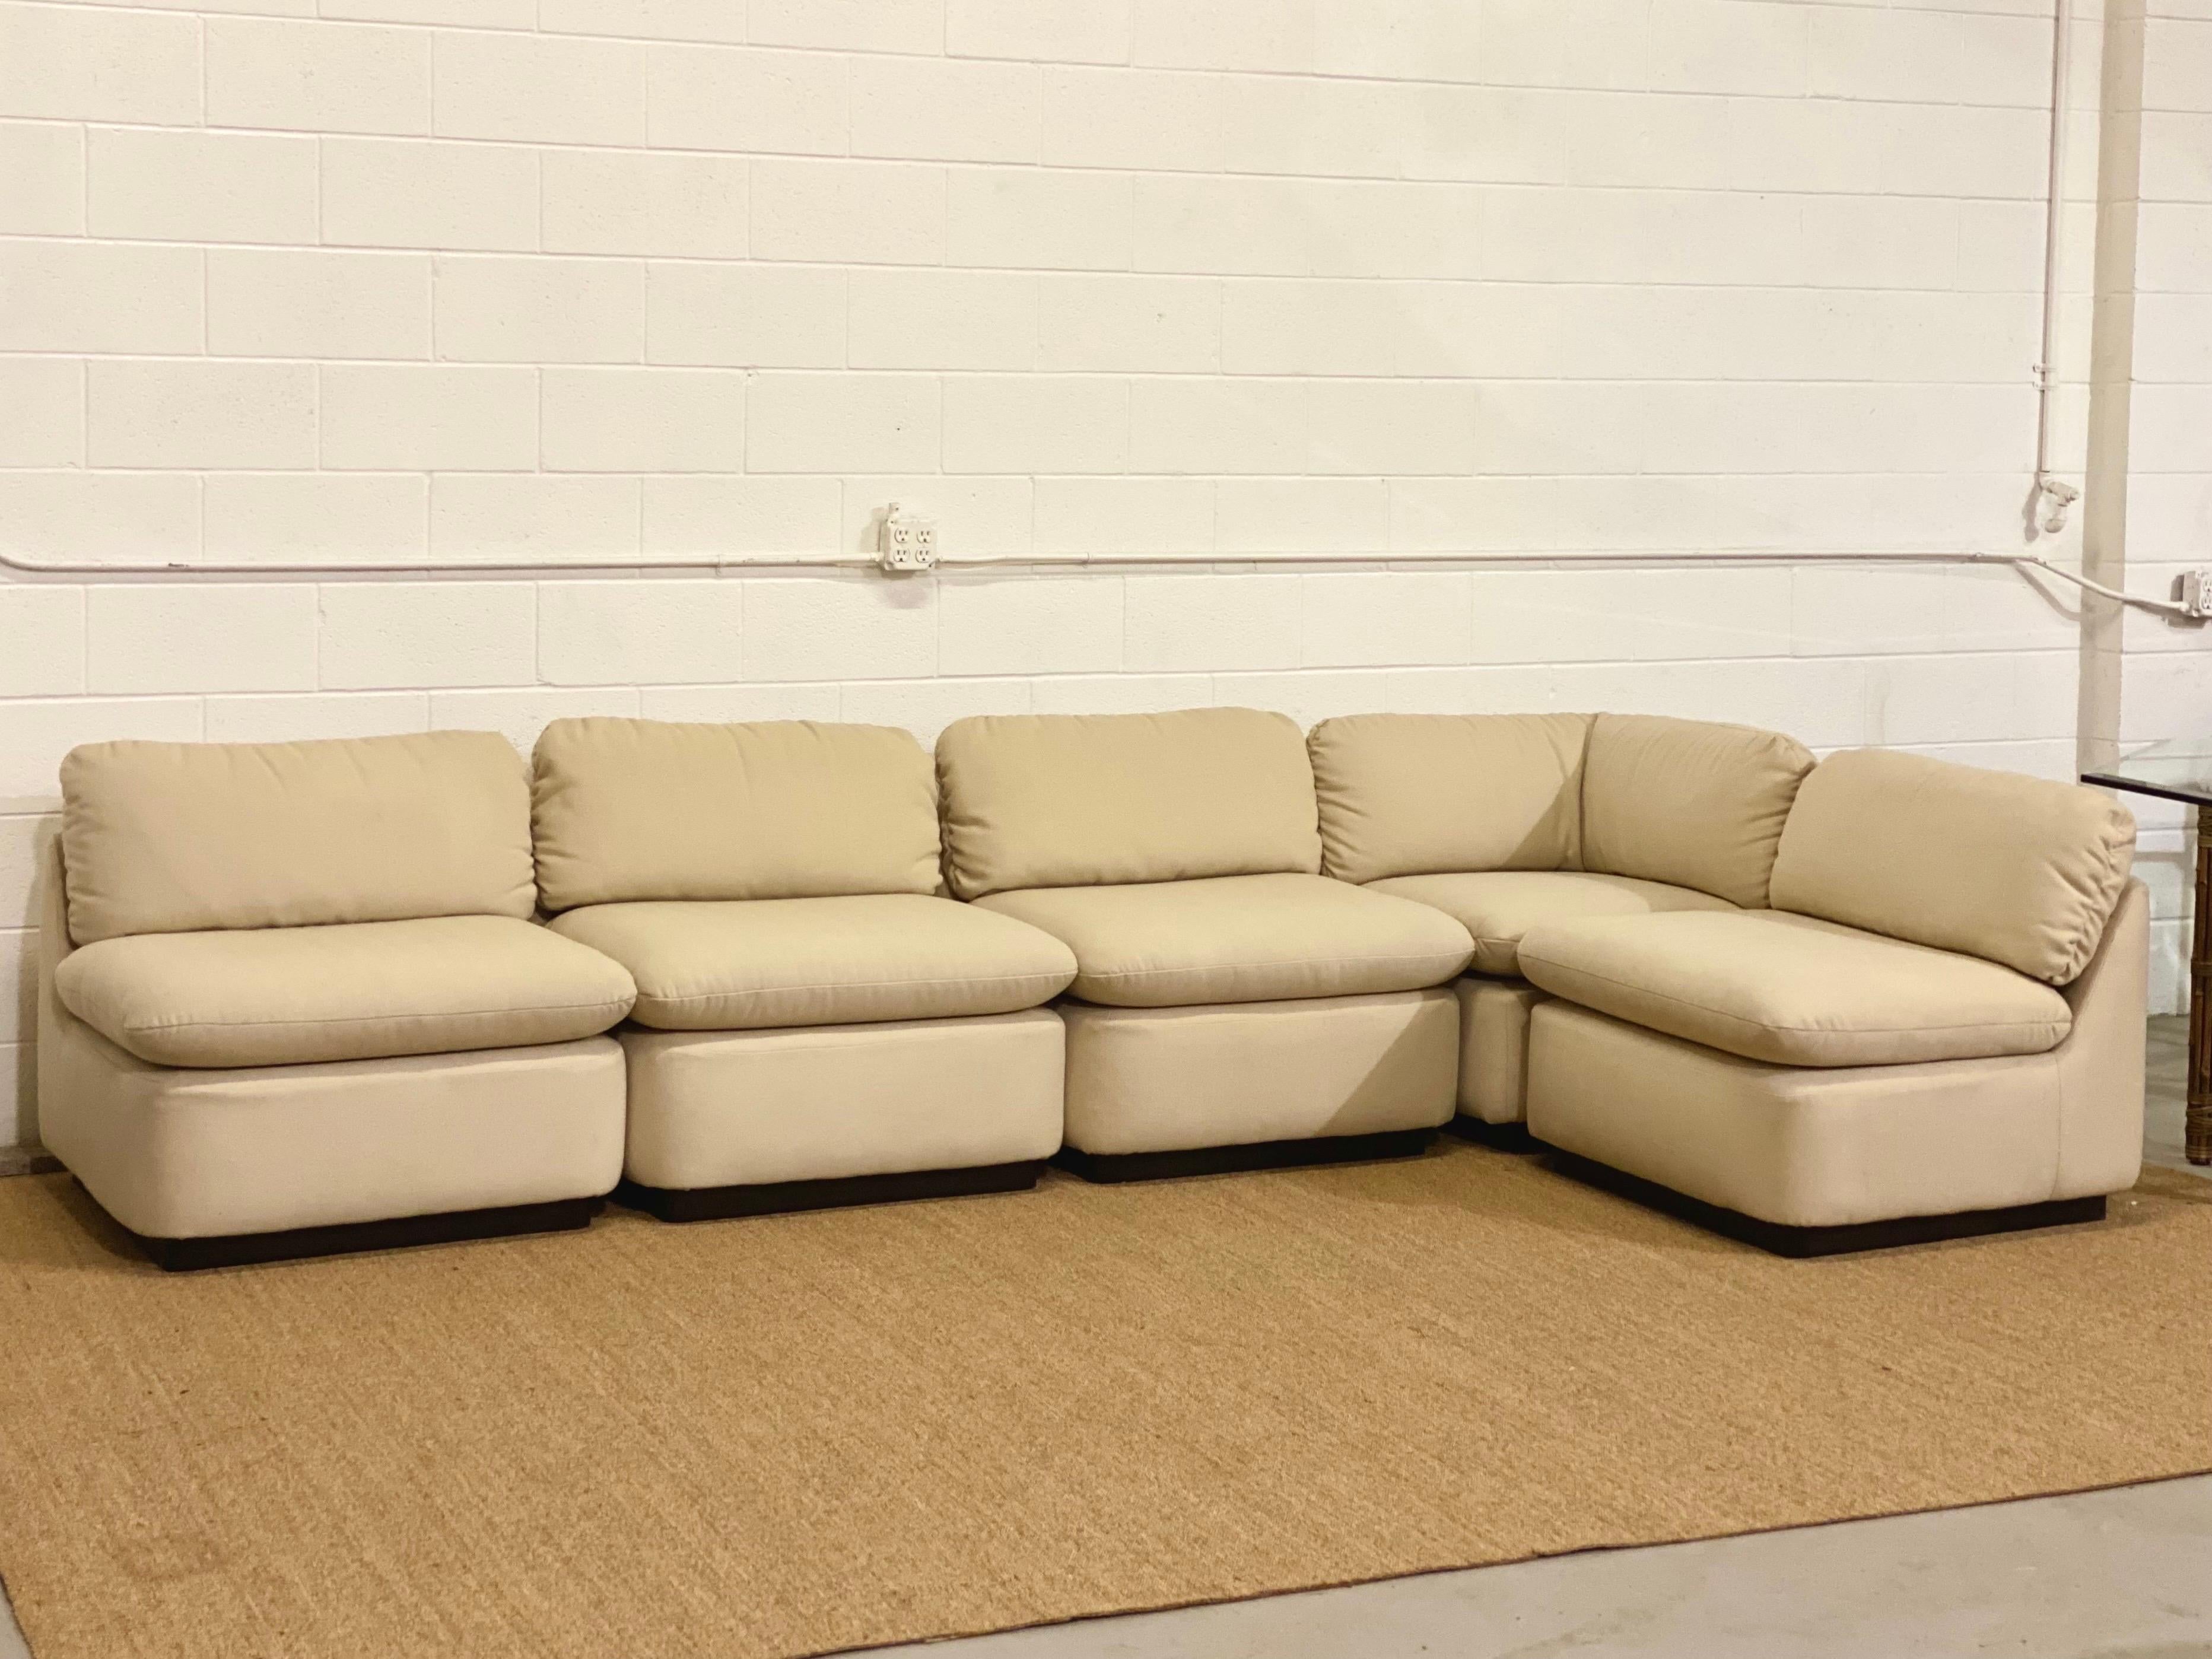 1990s Directional White Ivory Five Piece Modular Lounge Sectional – 5 Pieces For Sale 2